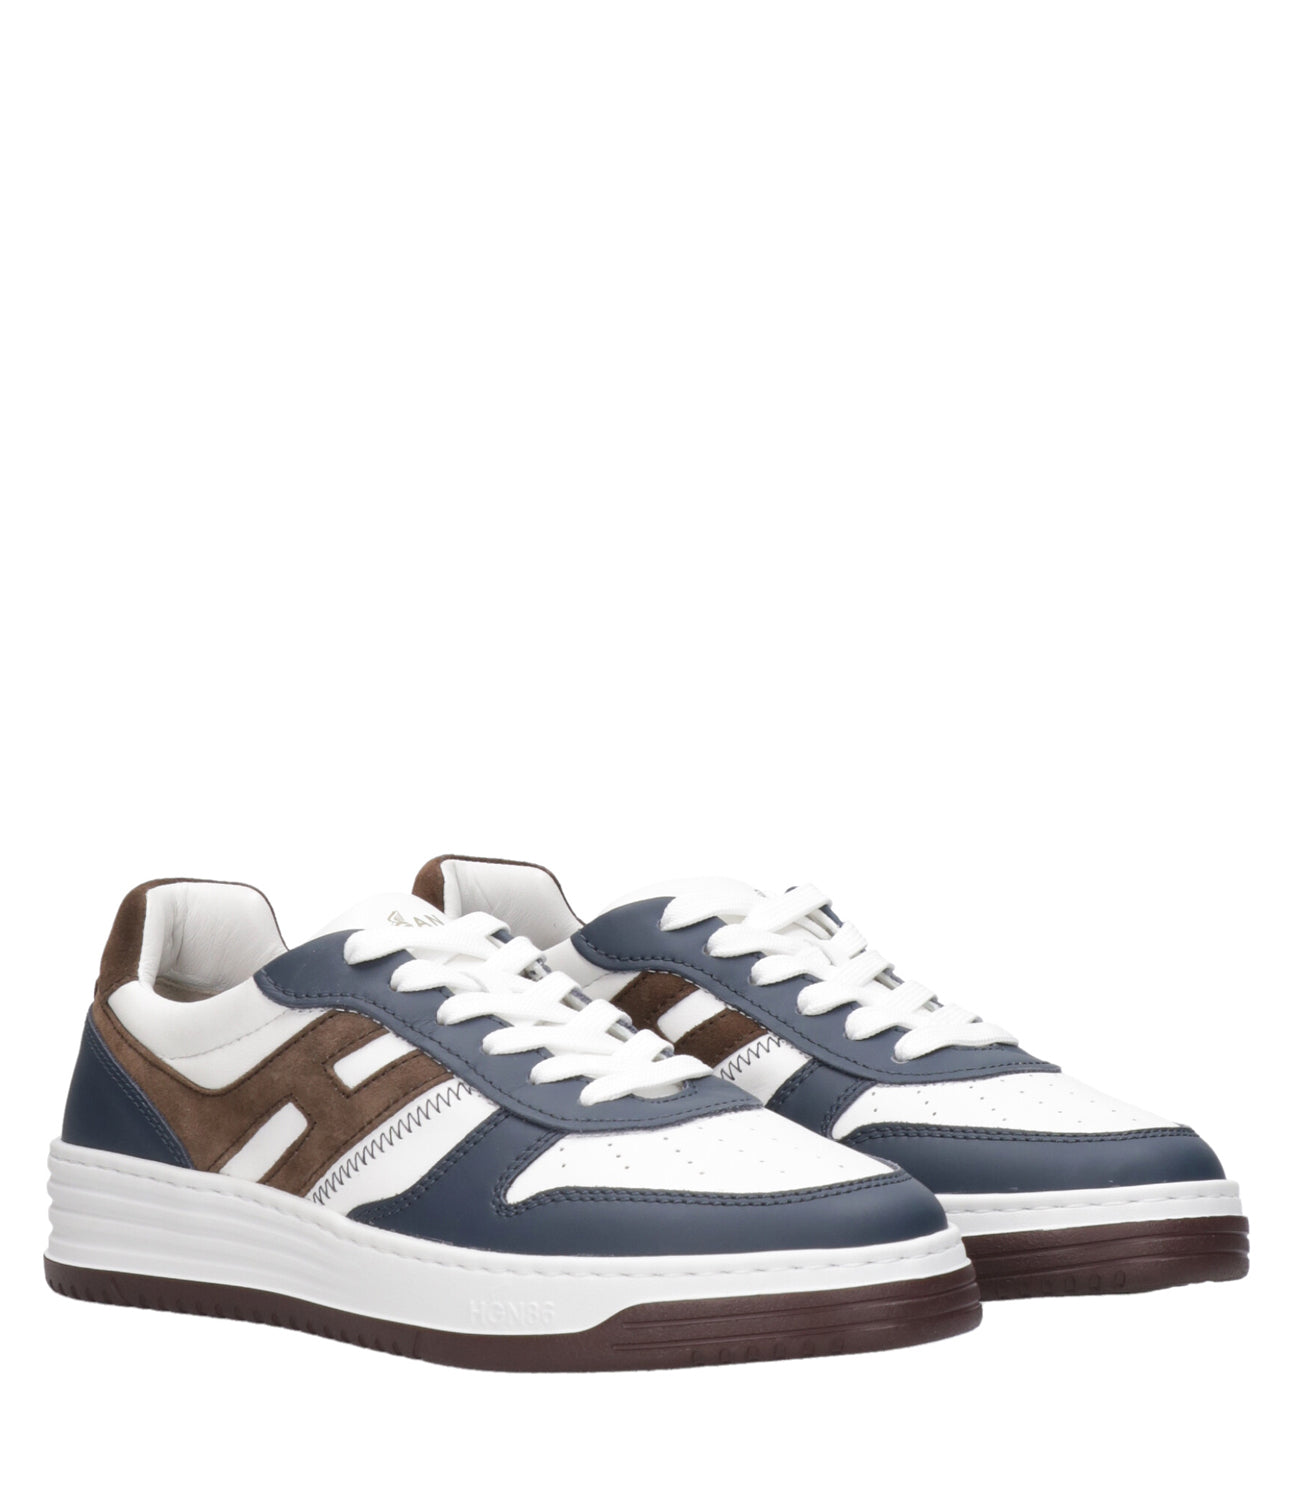 Hogan | Sneakers H60 Lace-up White, Blue and Brown